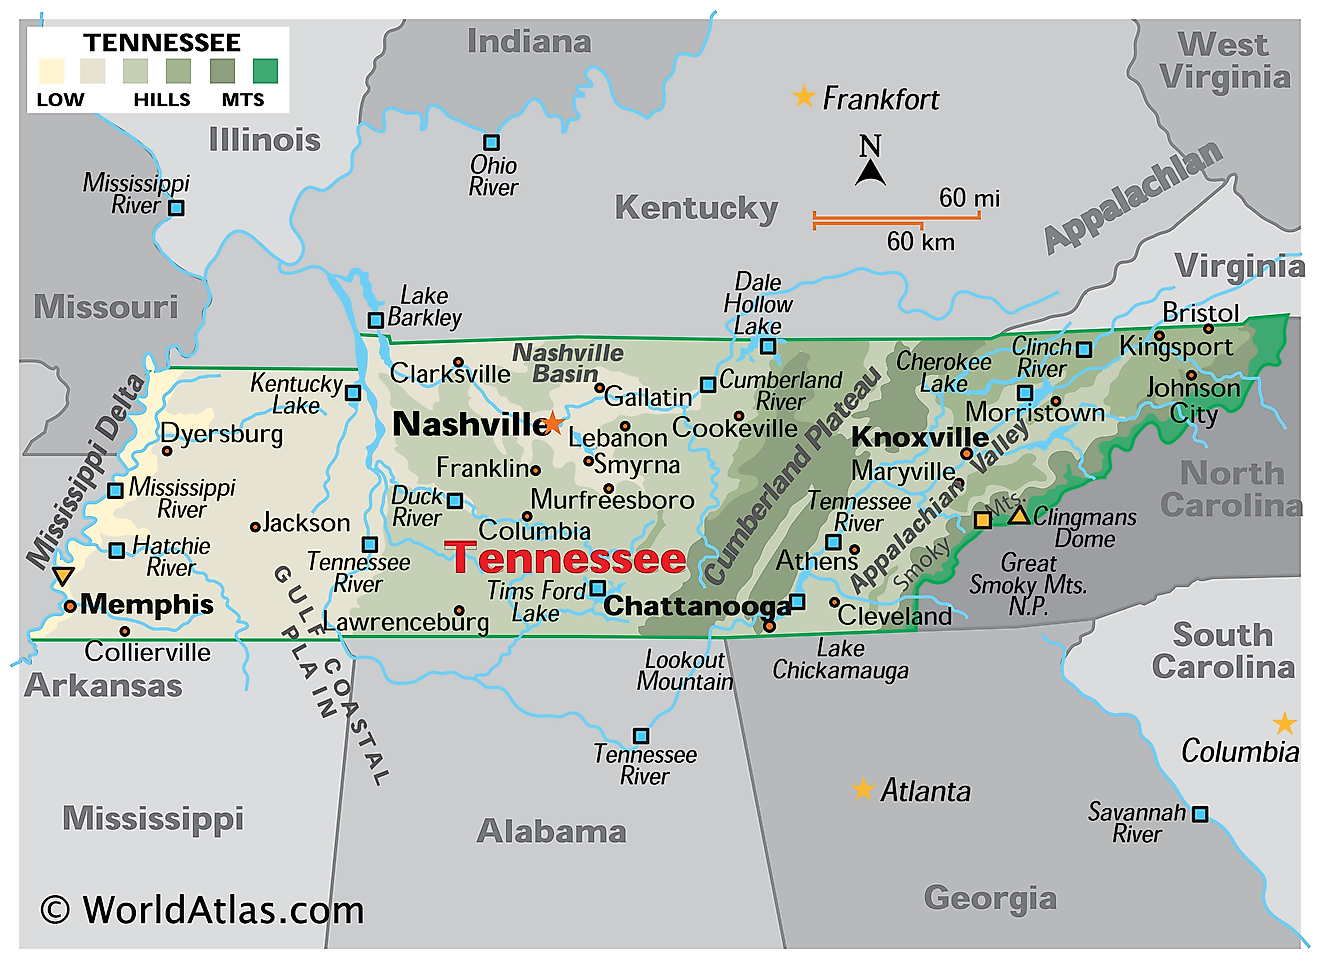 Physical Map of Tennessee. It shows the physical features of Tennessee including its mountain ranges, major rivers and lakes.